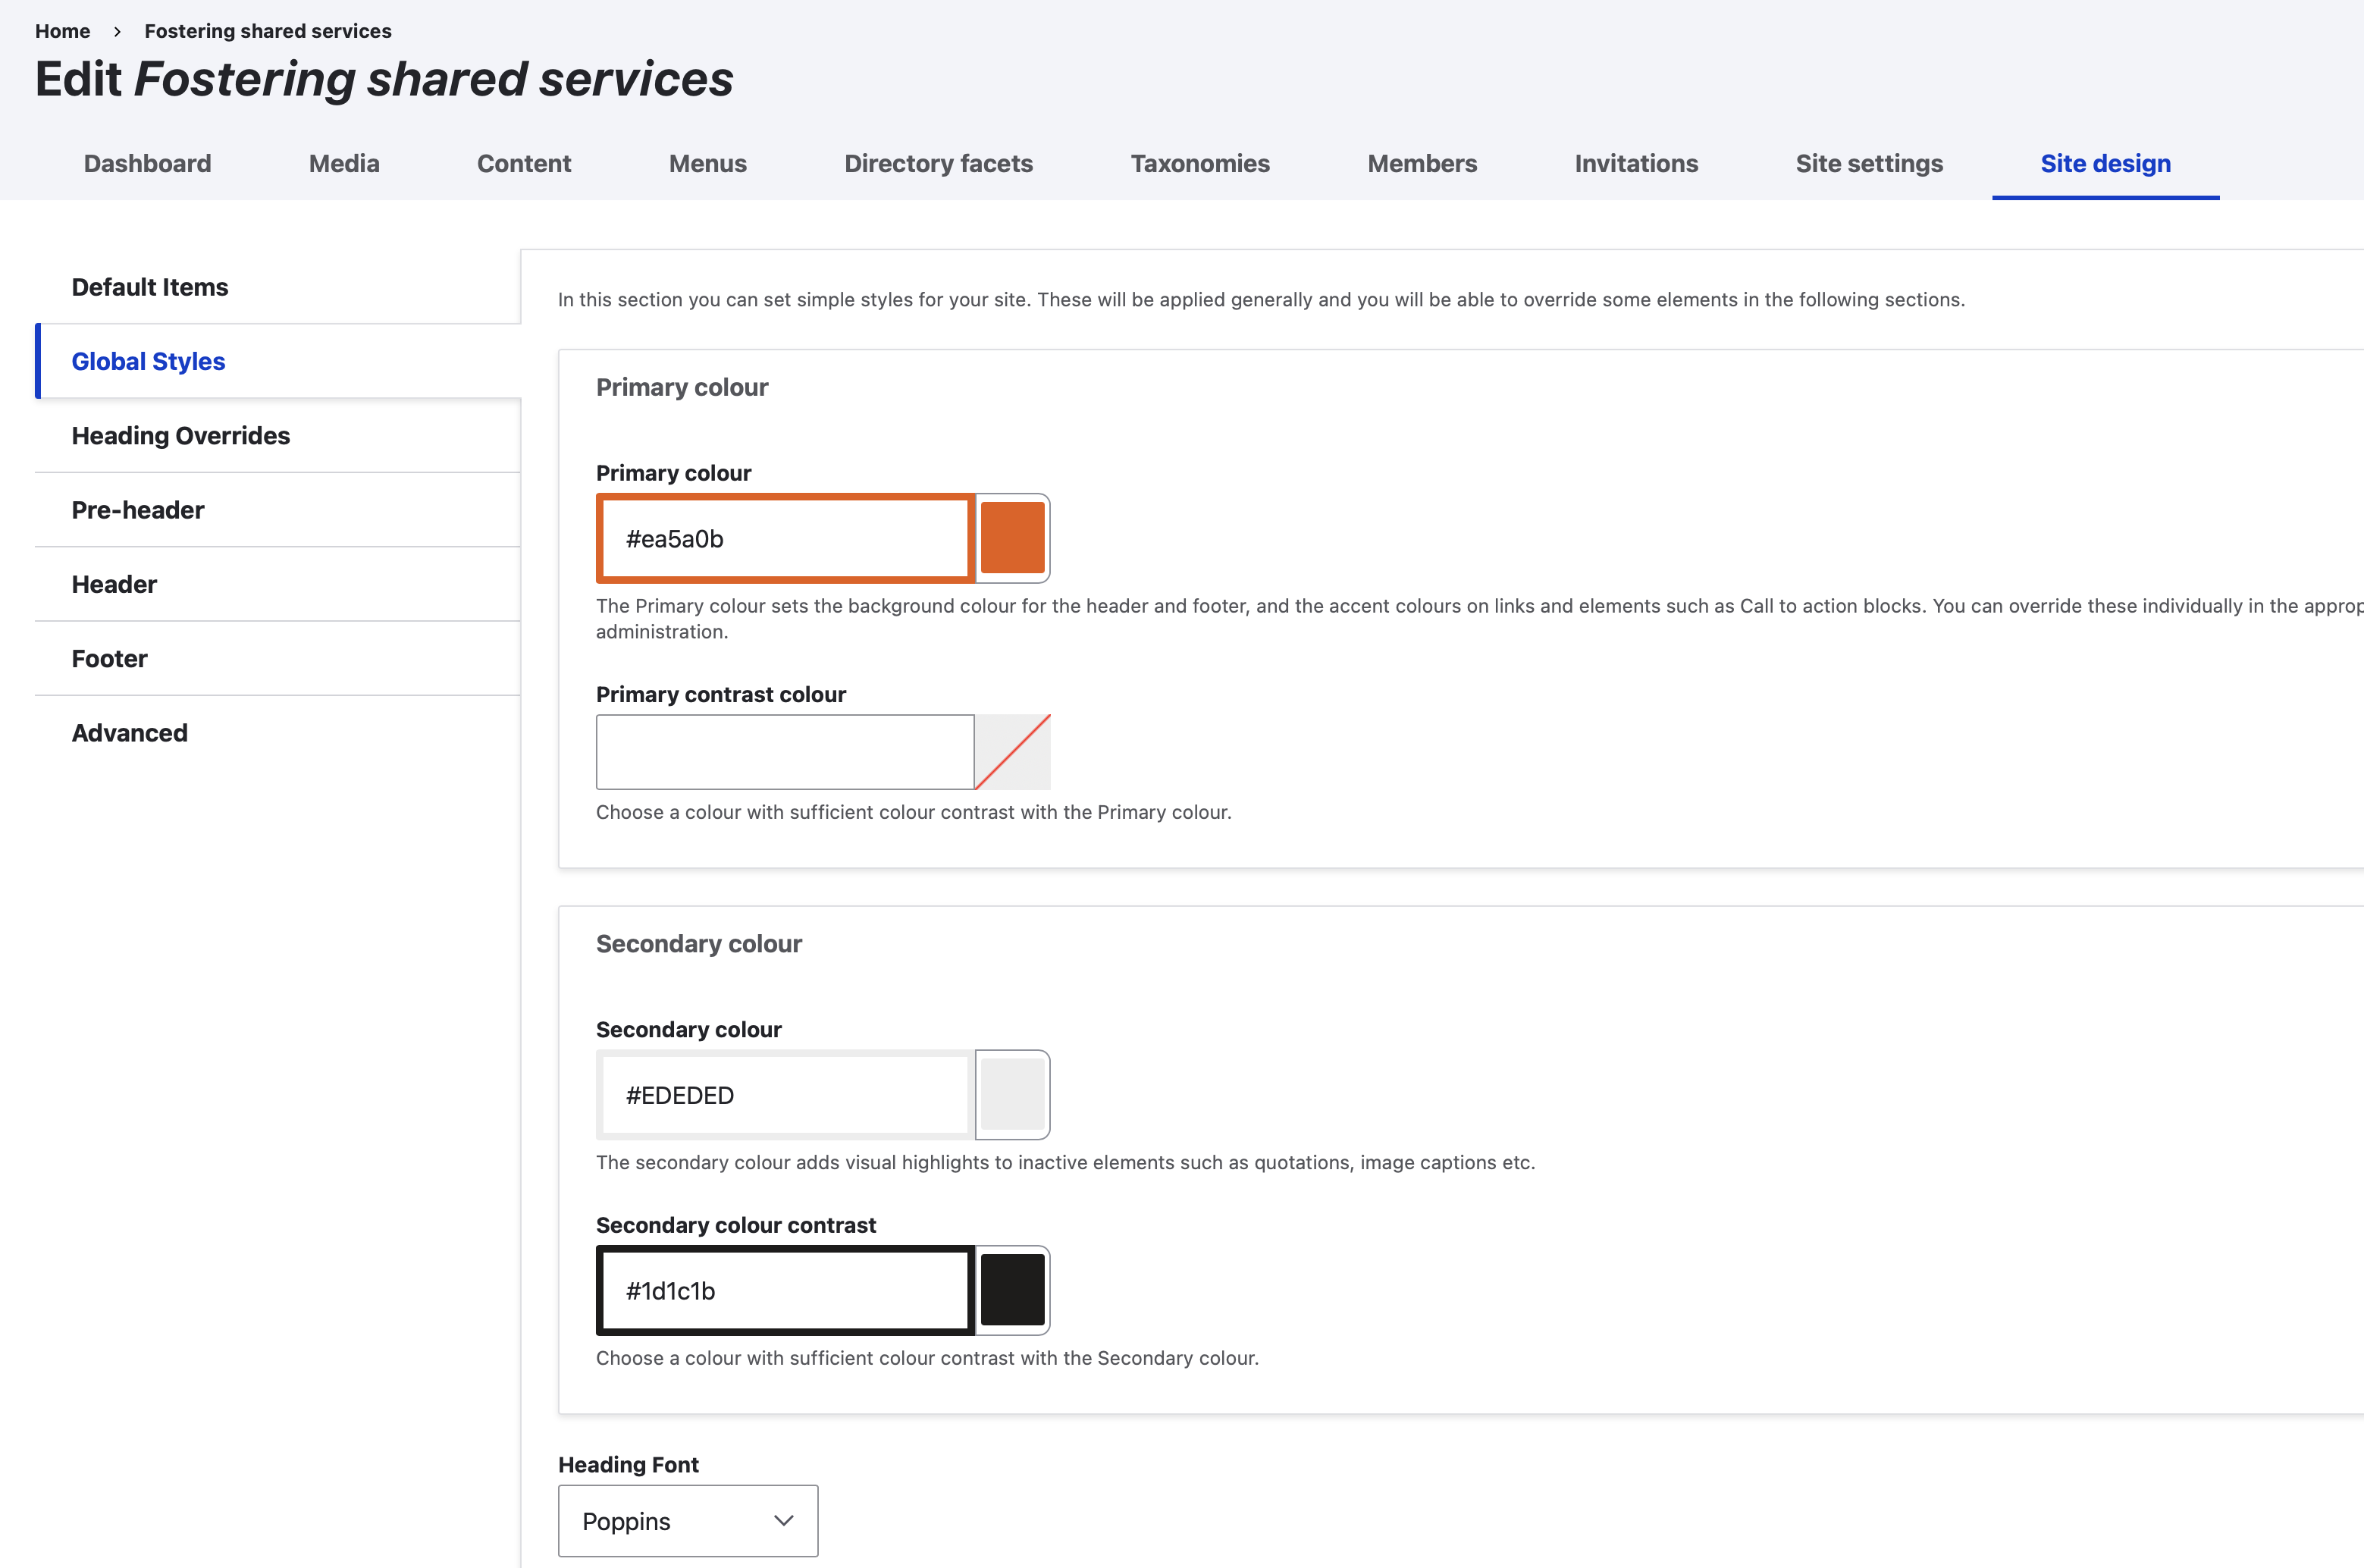 A screenshot of the site design settings page, showing orange as a primary colour and the option to set an accessible contrast color